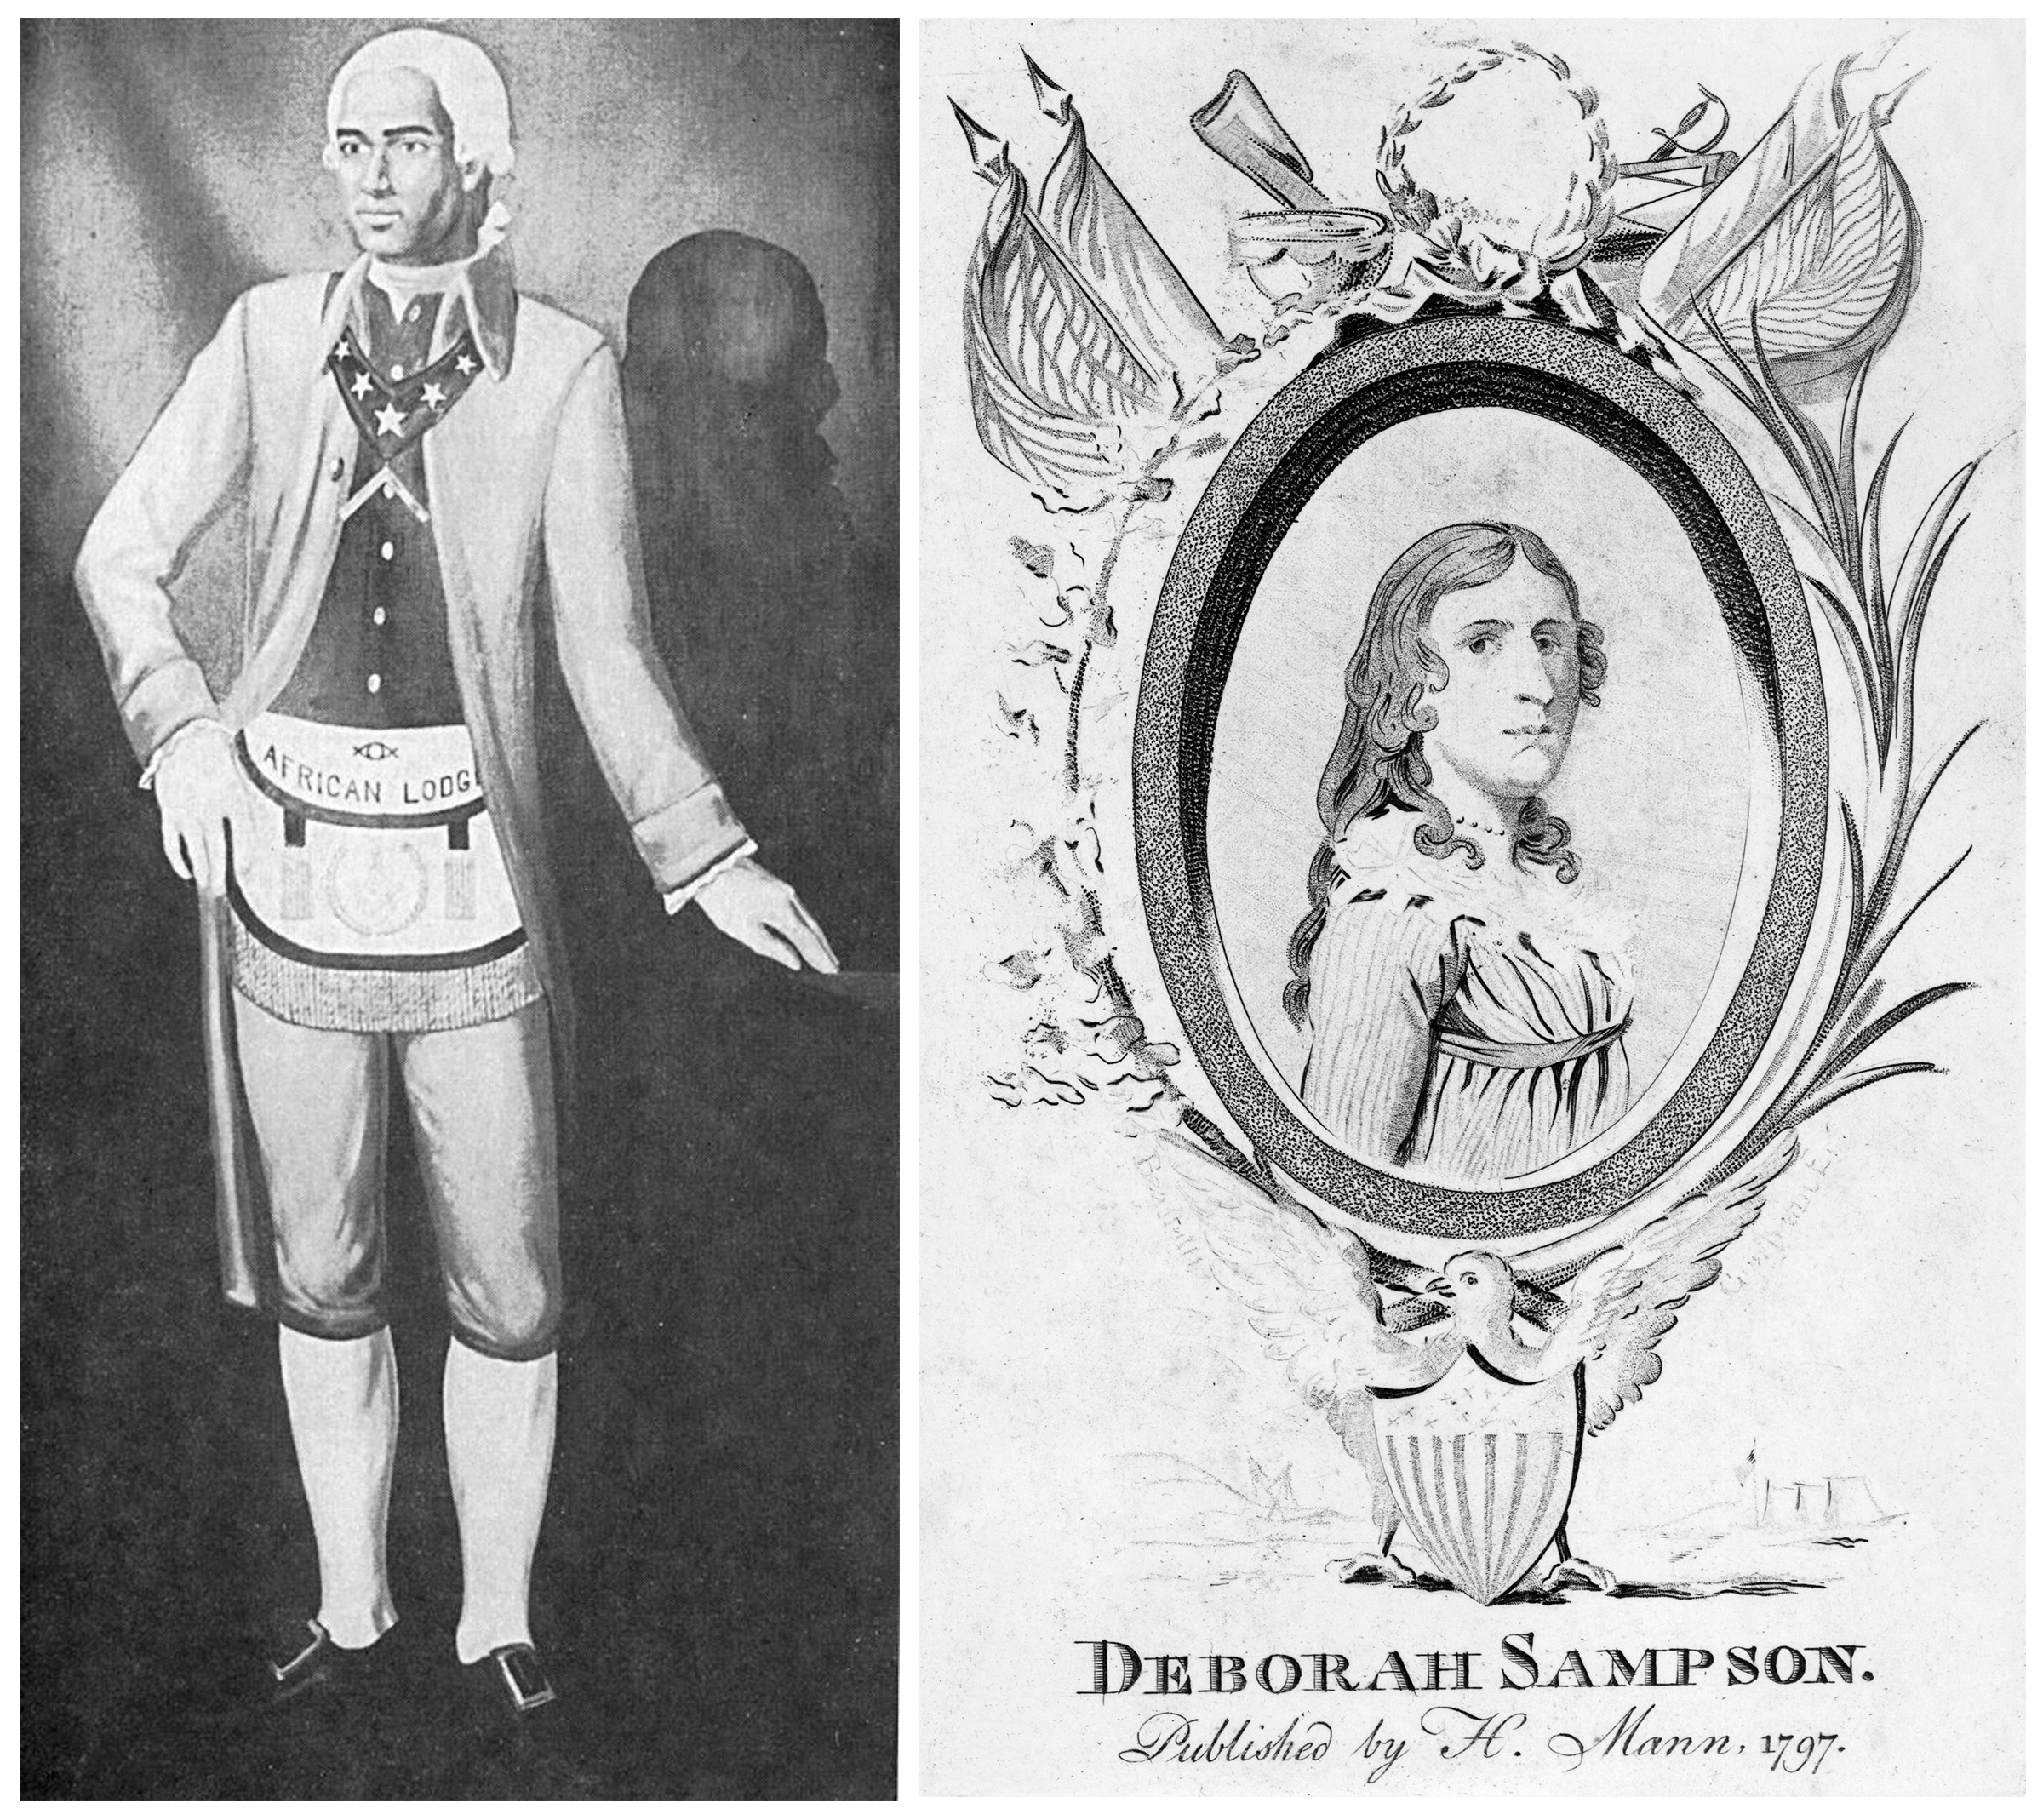 From left: An undated portrait of Prince Hall; an illustration of Deborah Sampson circa 1797 (The History Collection/Alamy; Hulton Archive/Getty Images)